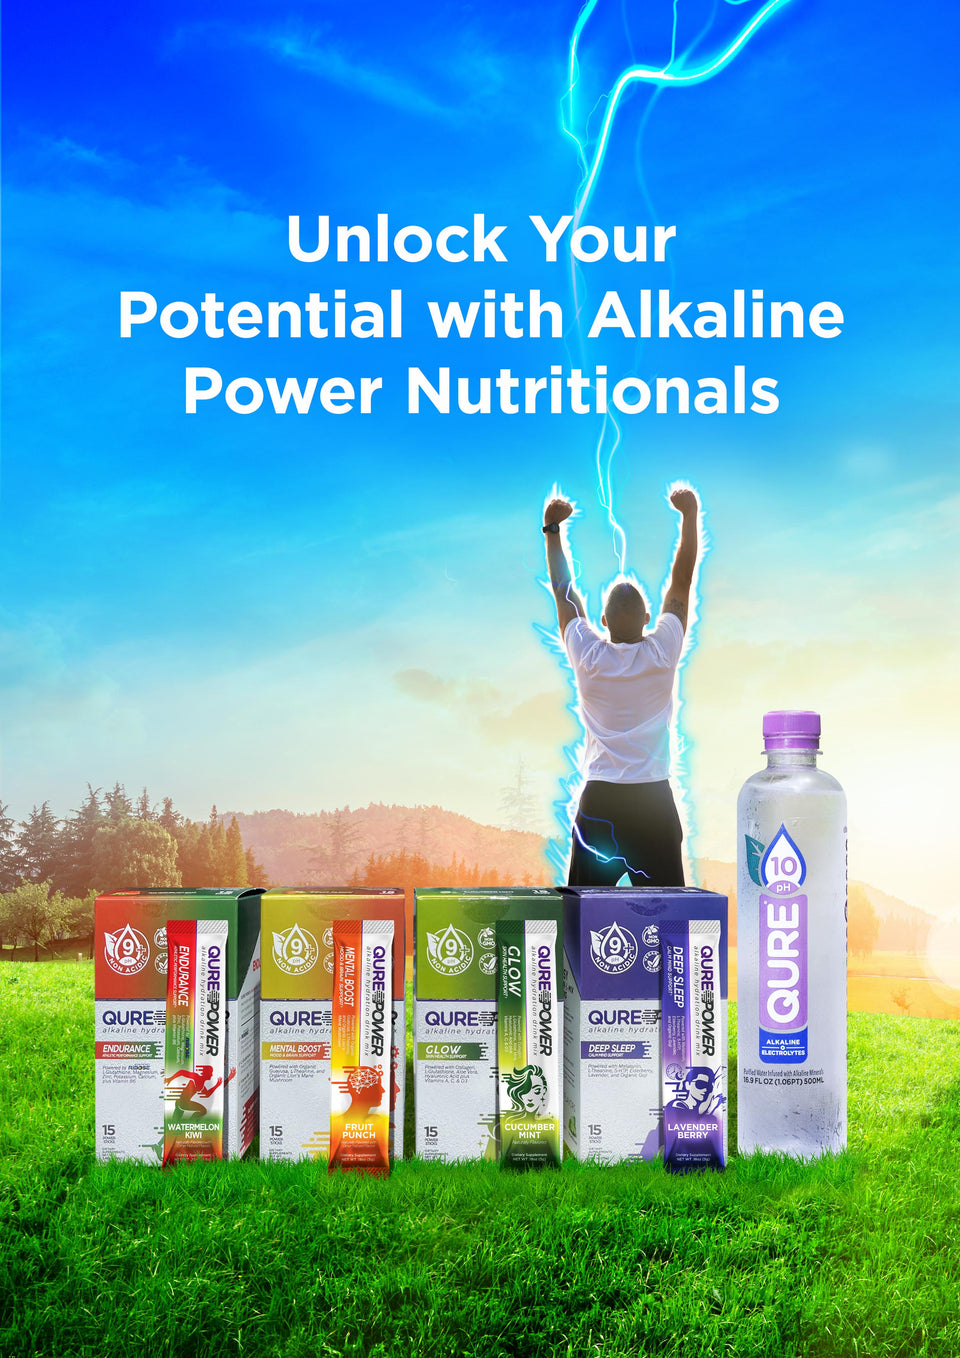  Unlock your potential with alkaline power nutritionals